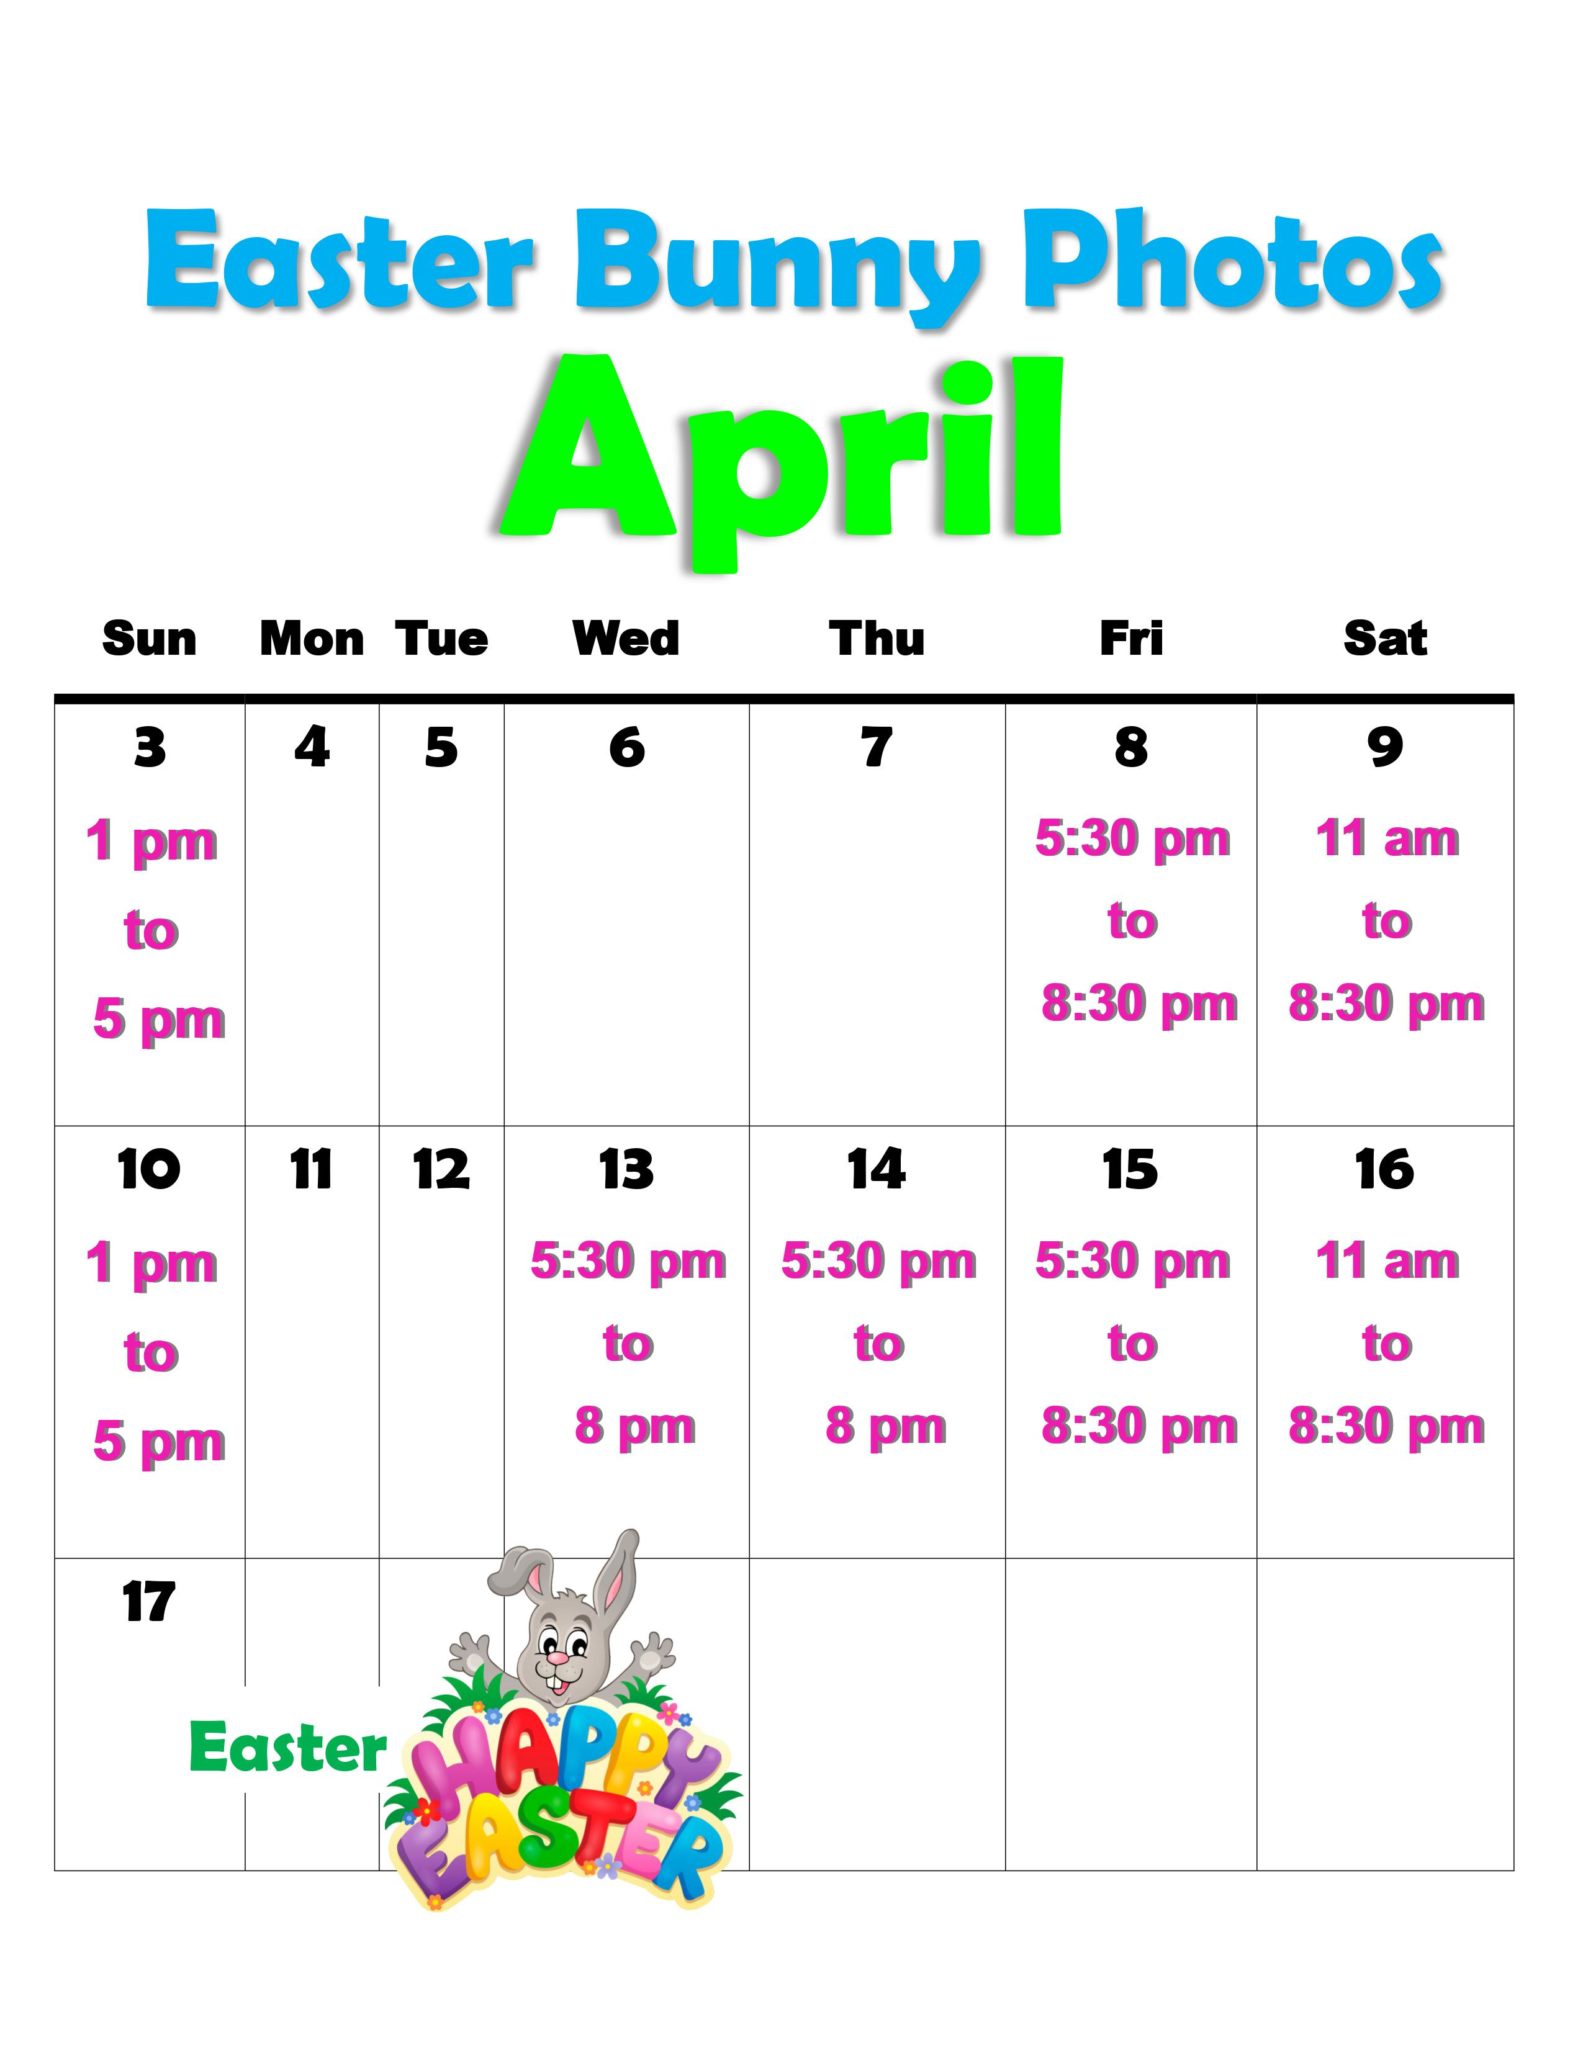 The Easter Bunny is Coming to Town! - Biggs Park Mall